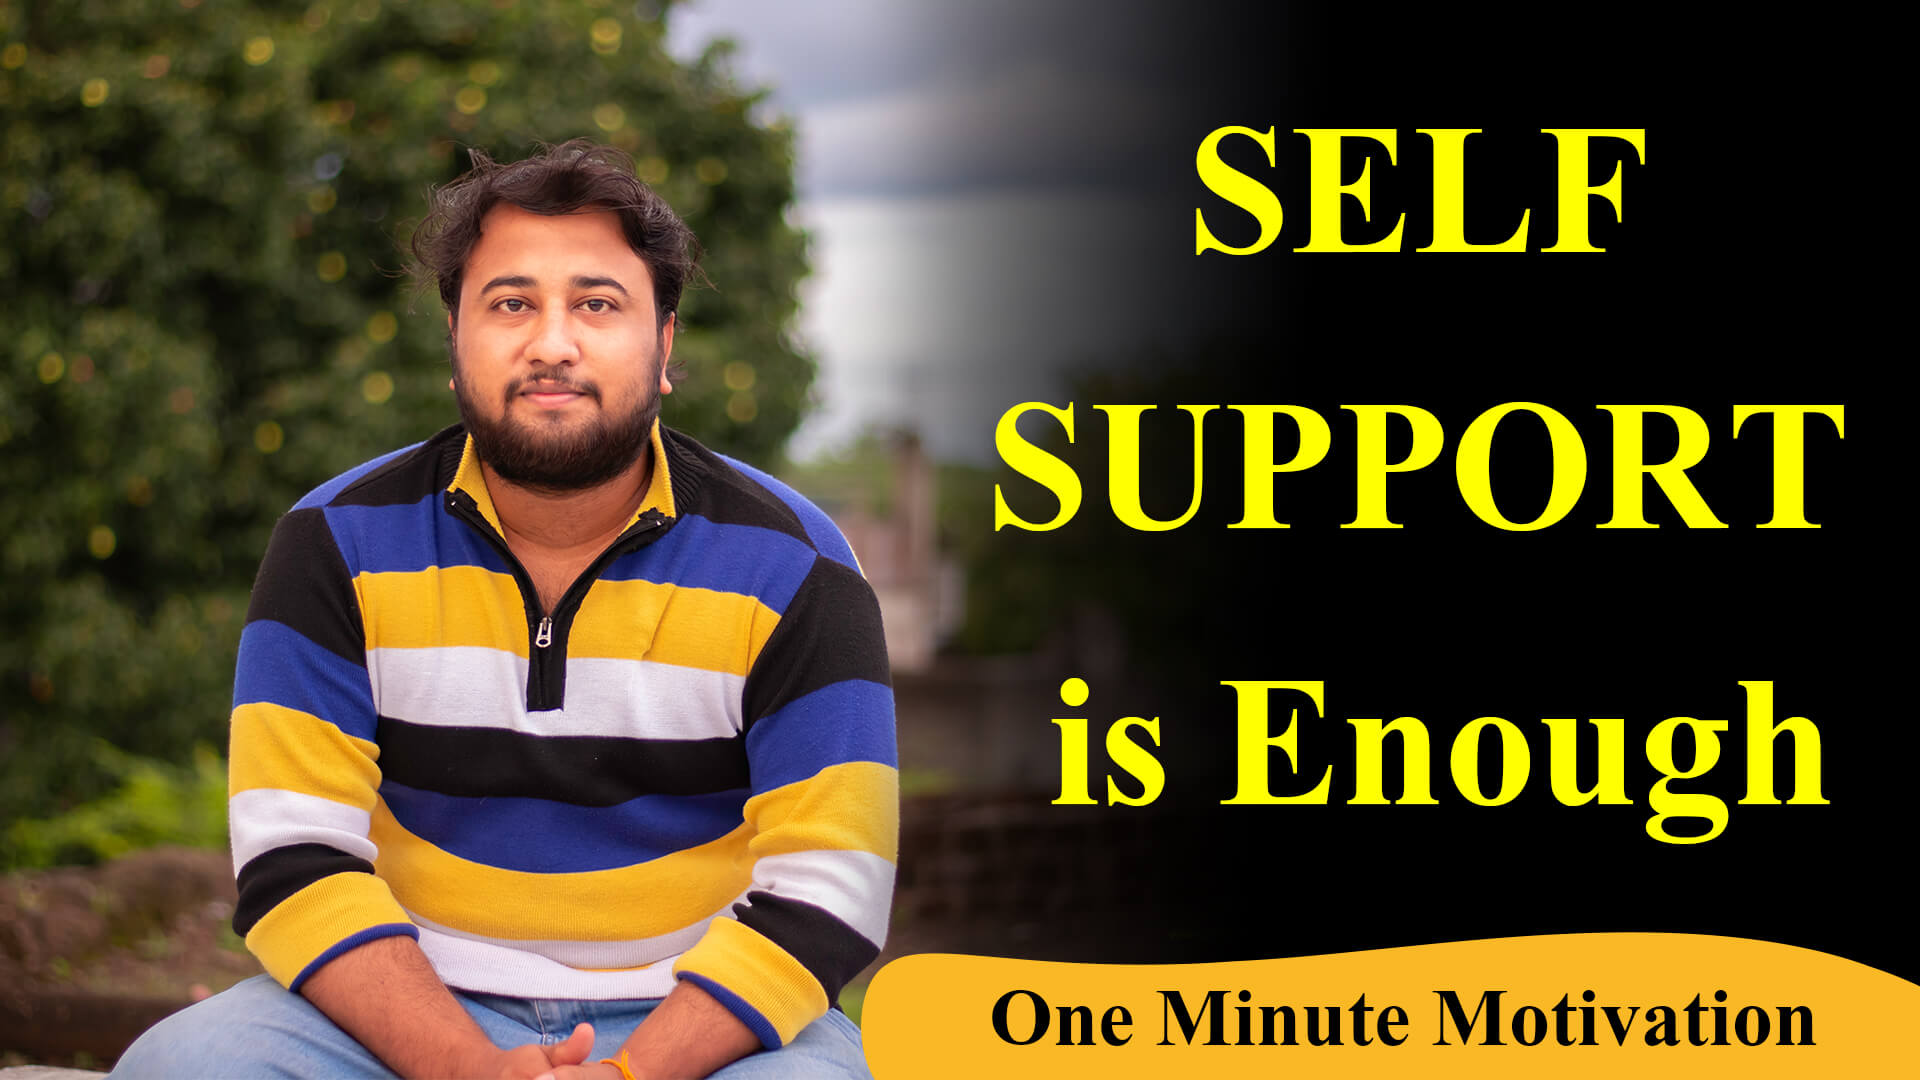 You are currently viewing SELF SUPPORT is Enough – One Minute Motivation in English – Motivational Inspirational Poetry in English